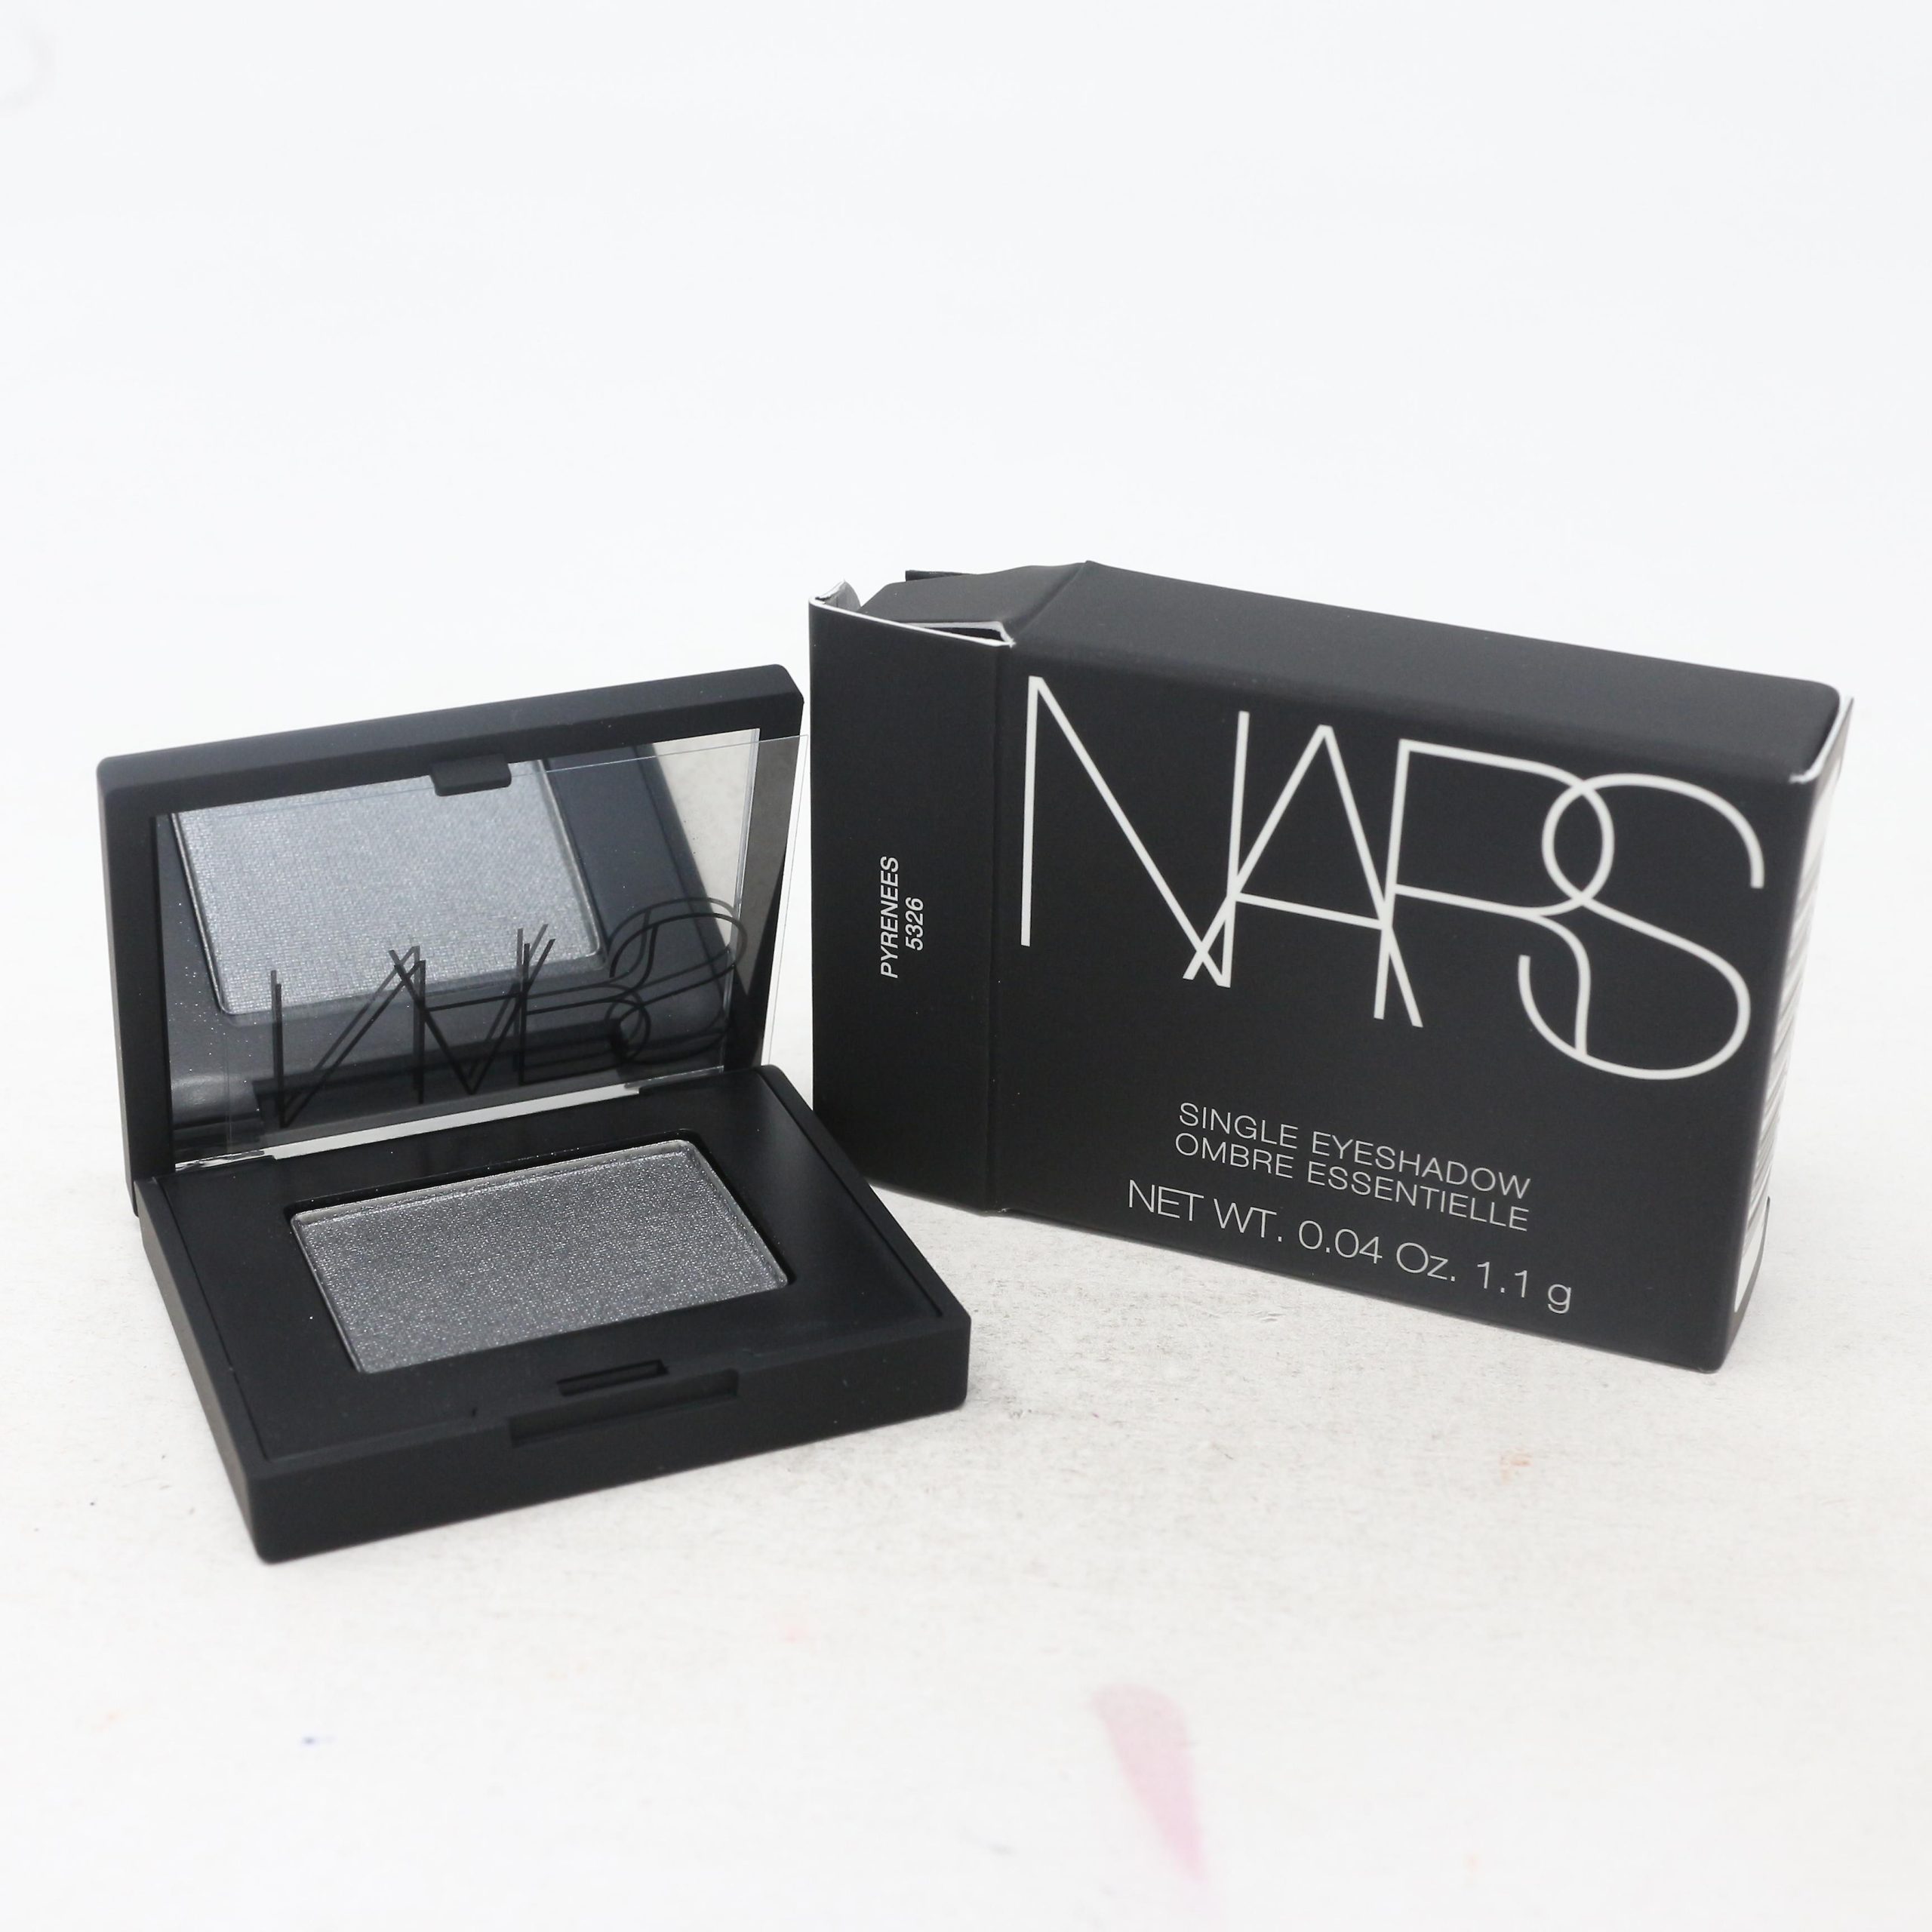 NARS Cosmetics Eyeshadows: A Symphony of Color and Elegance